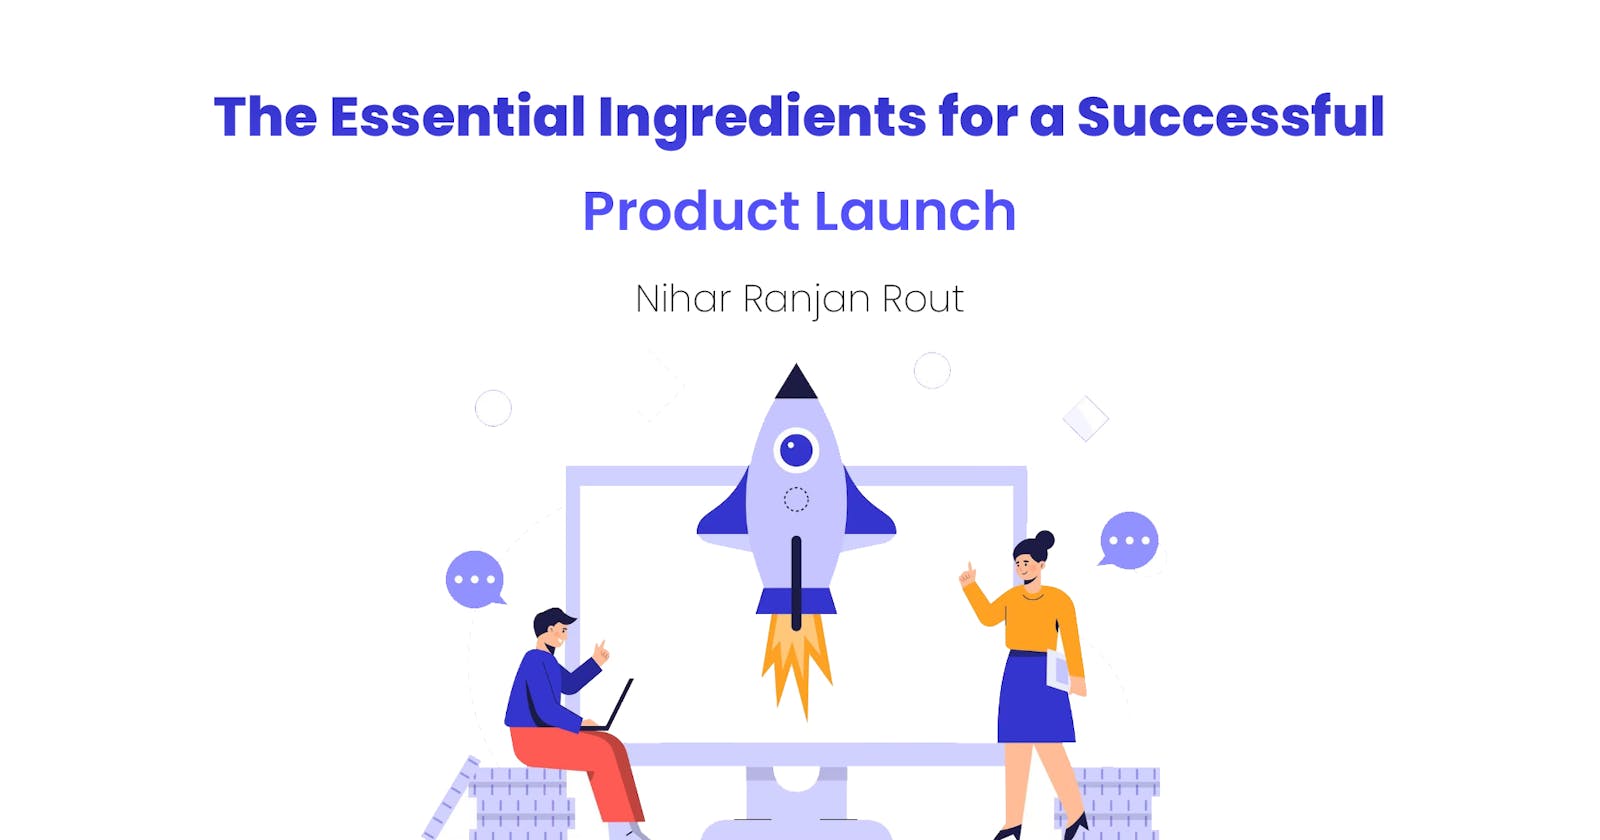 The Essential Ingredients for a Successful Product Launch By Nihar Ranjan Rout